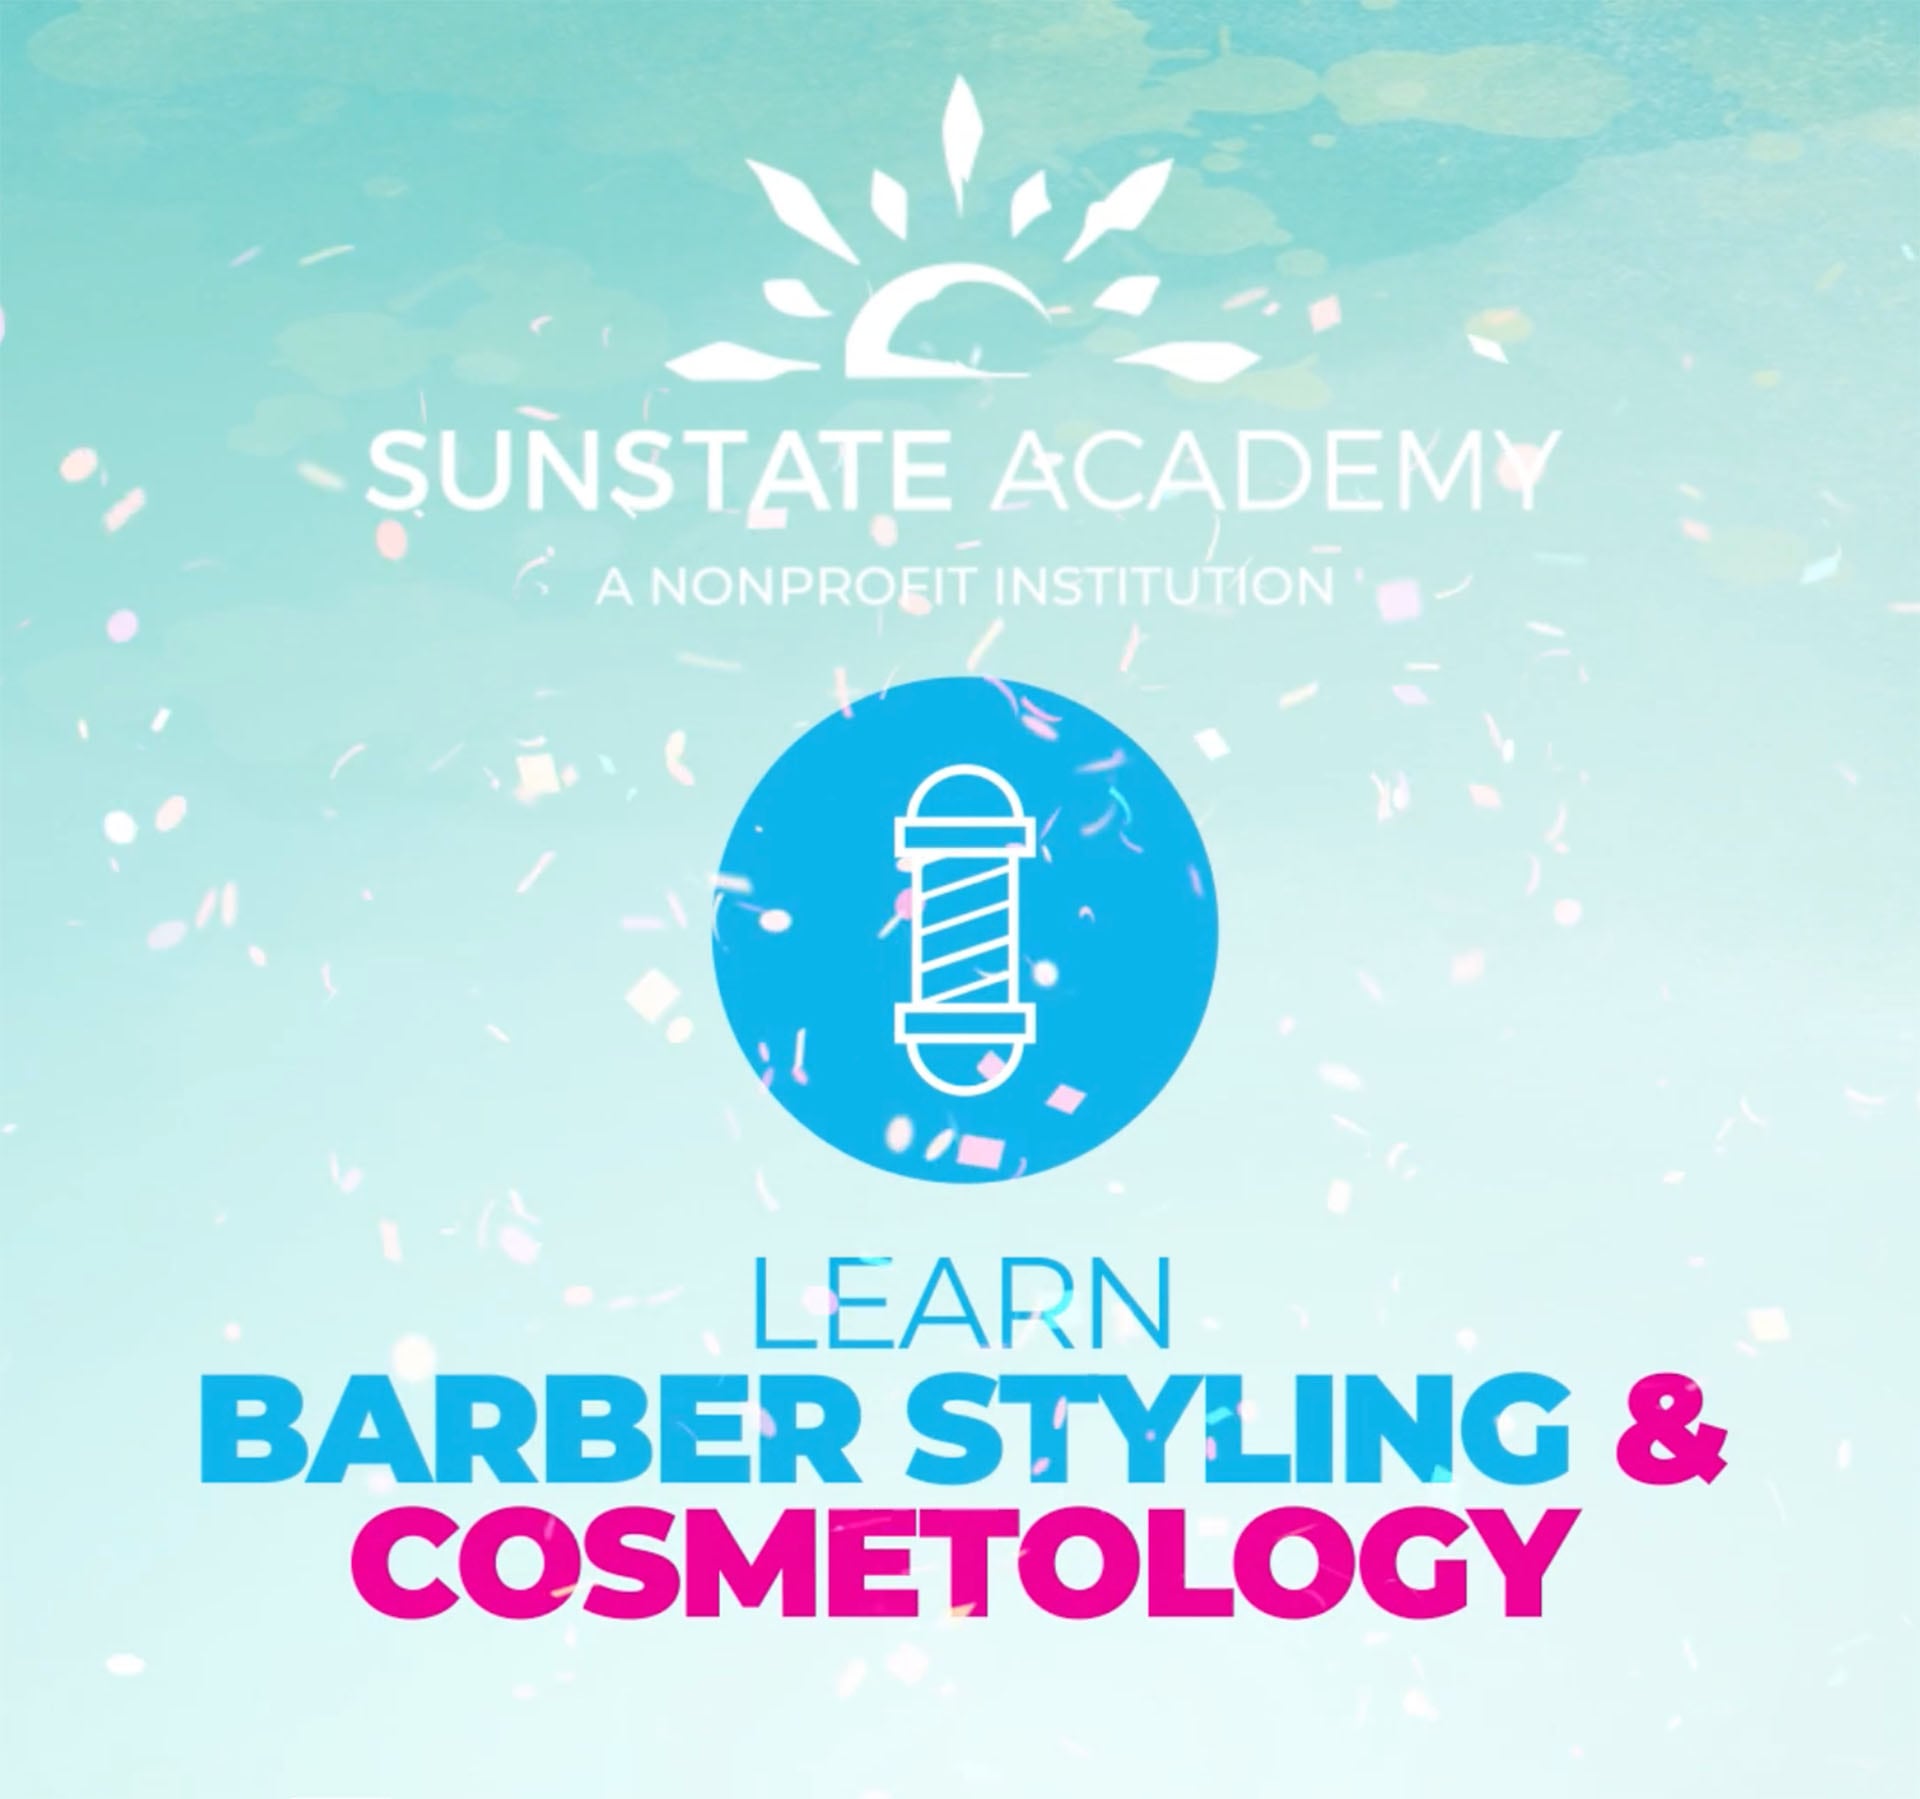 Sunstate Academy Barber Styling & Cosmetology Instagram animation